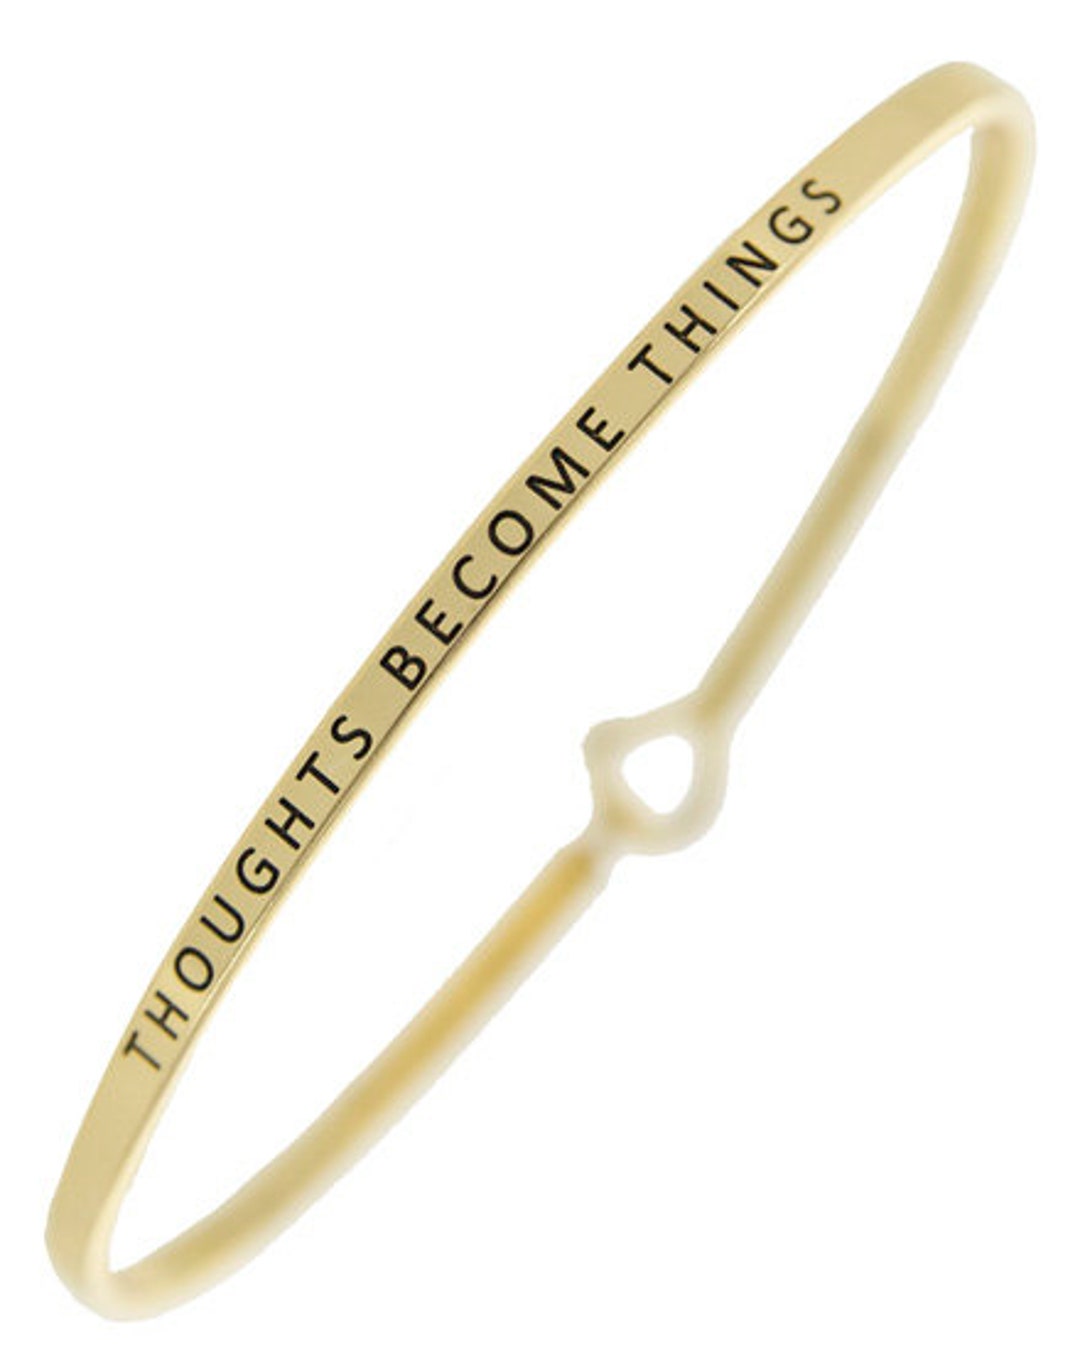 Thoughts Become Things Bracelet Message Bracelet Engraved 